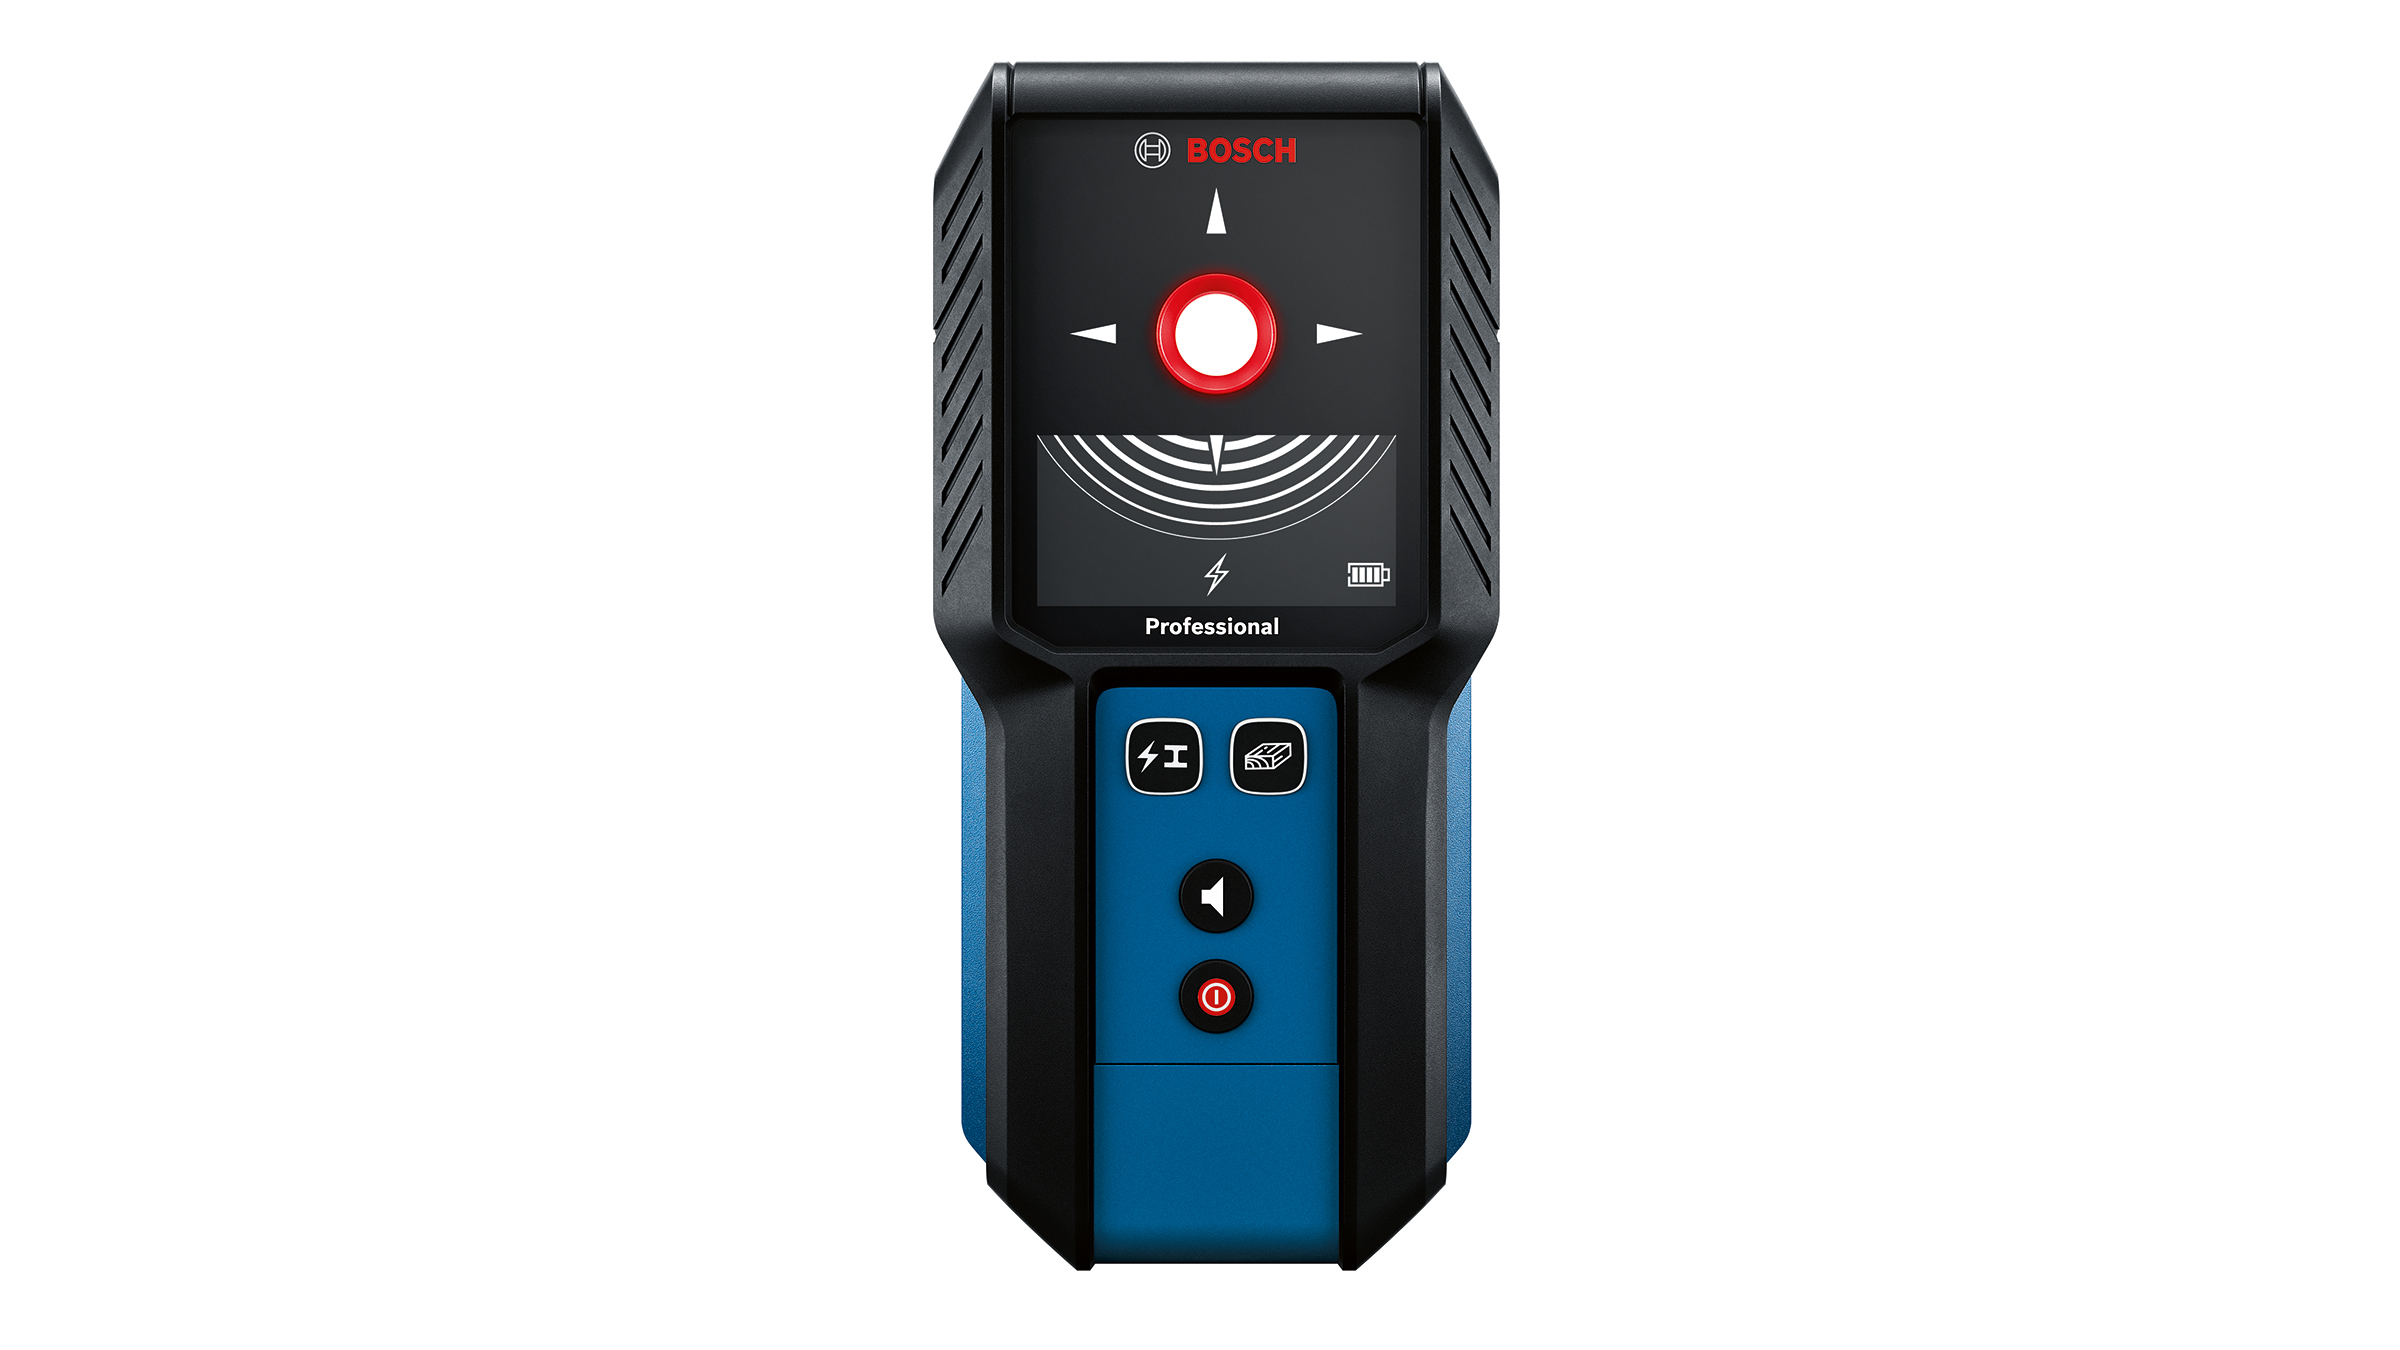 The most popular detector in its class is now even better: Bosch GMS 120-27 Professional multi scanner for pros